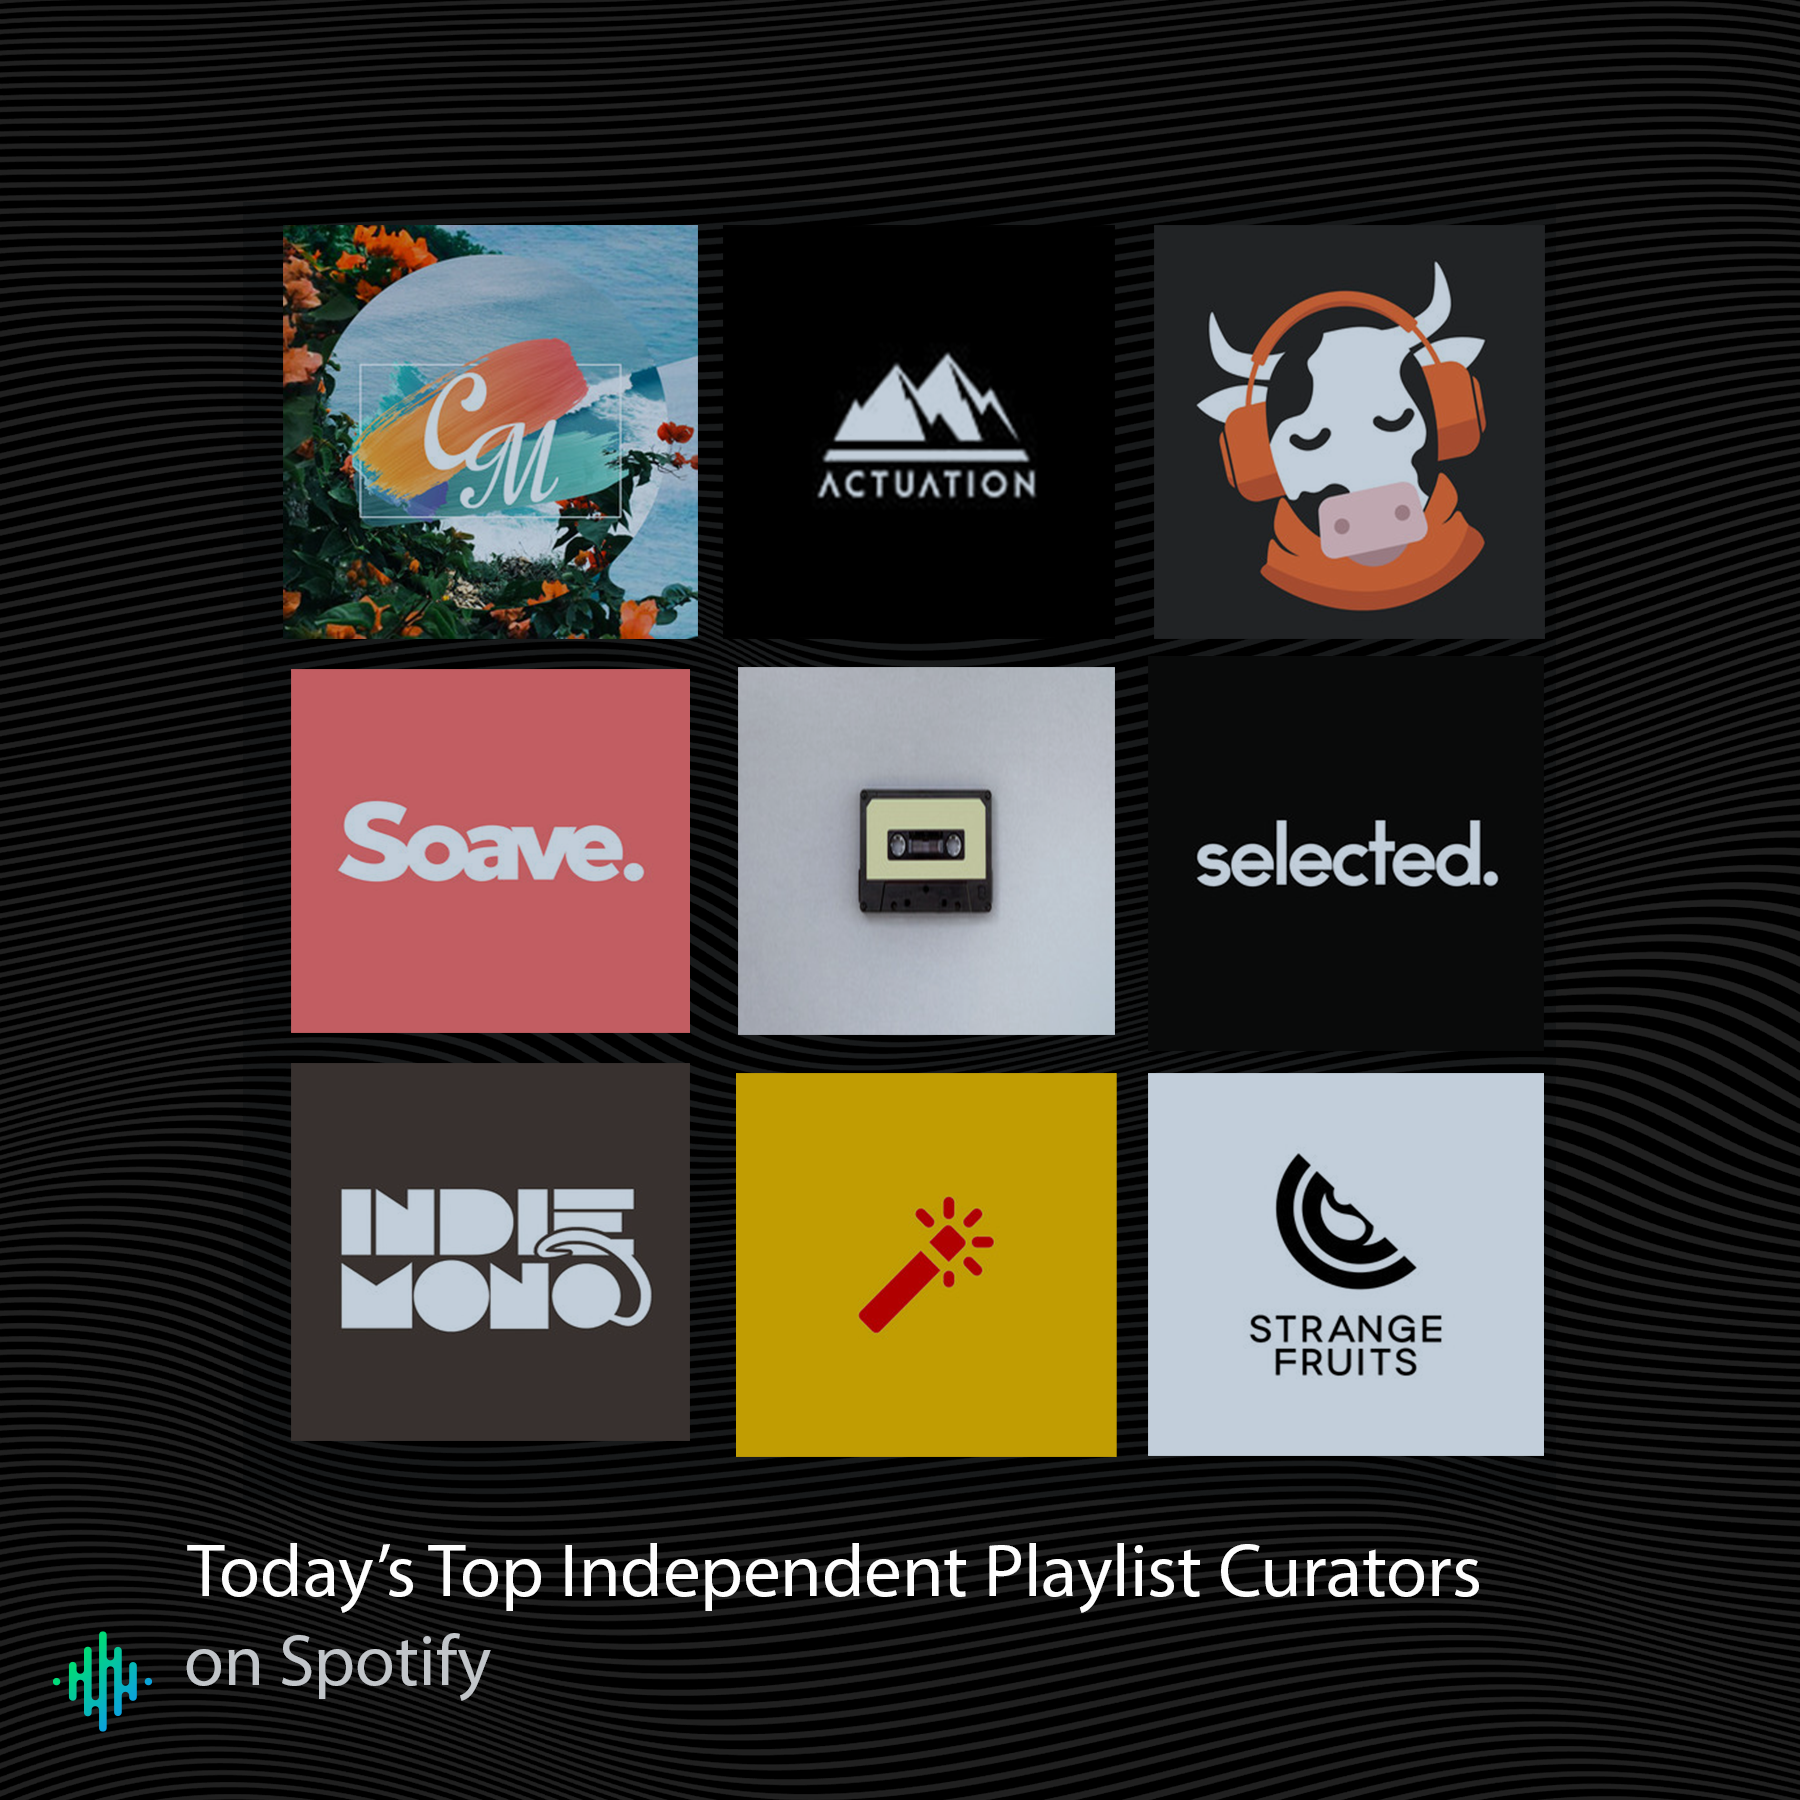 A List of Today's Top Independent Spotify Playlist Curators